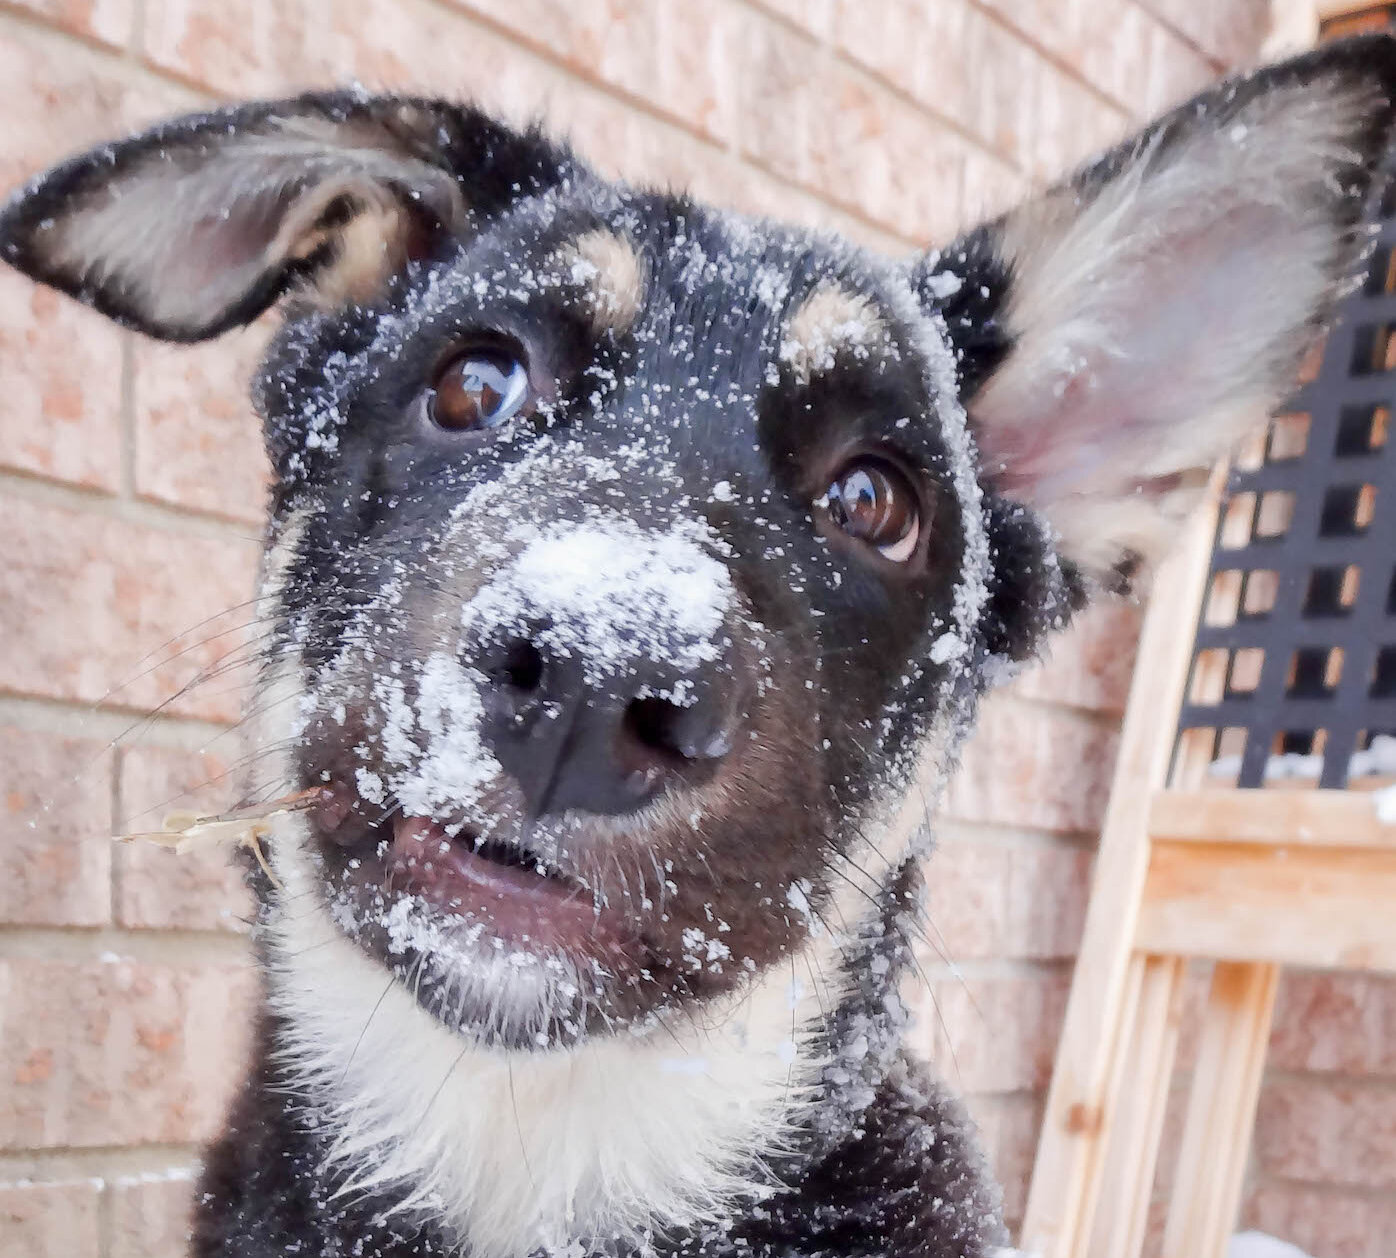 Cute puppy in snow with quizzical expression